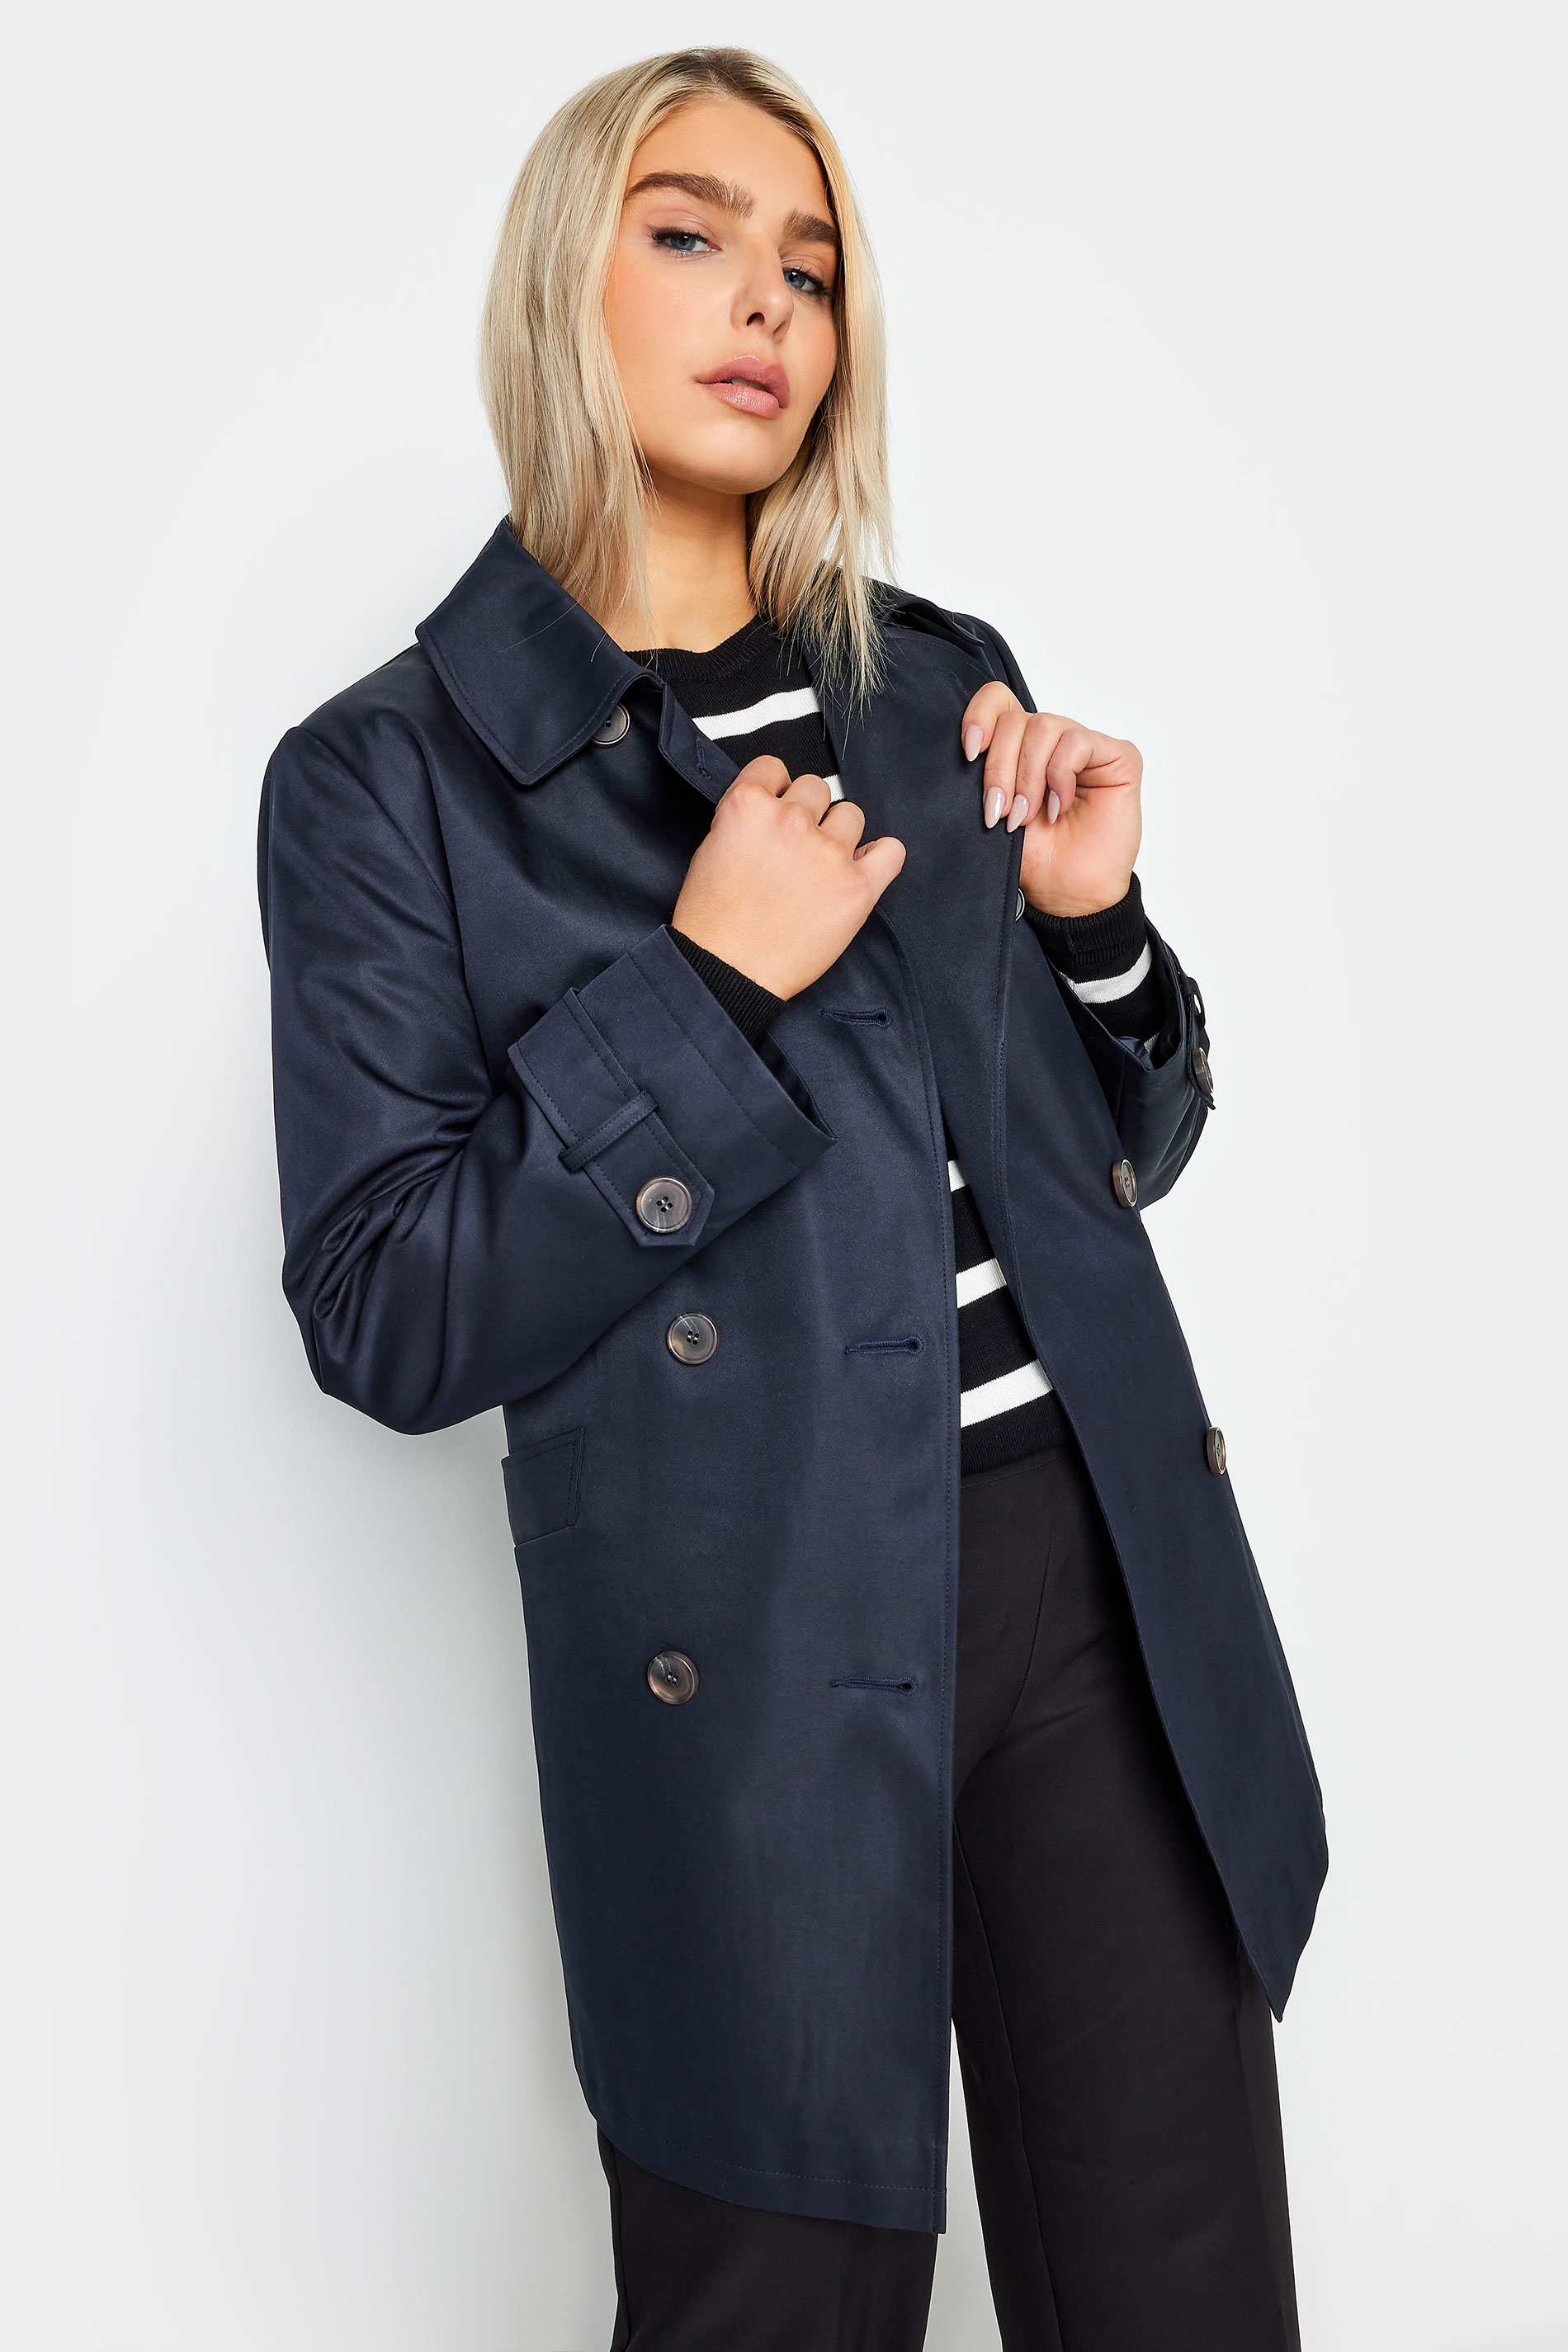 M&Co Navy Blue Trench Coat | M&Co